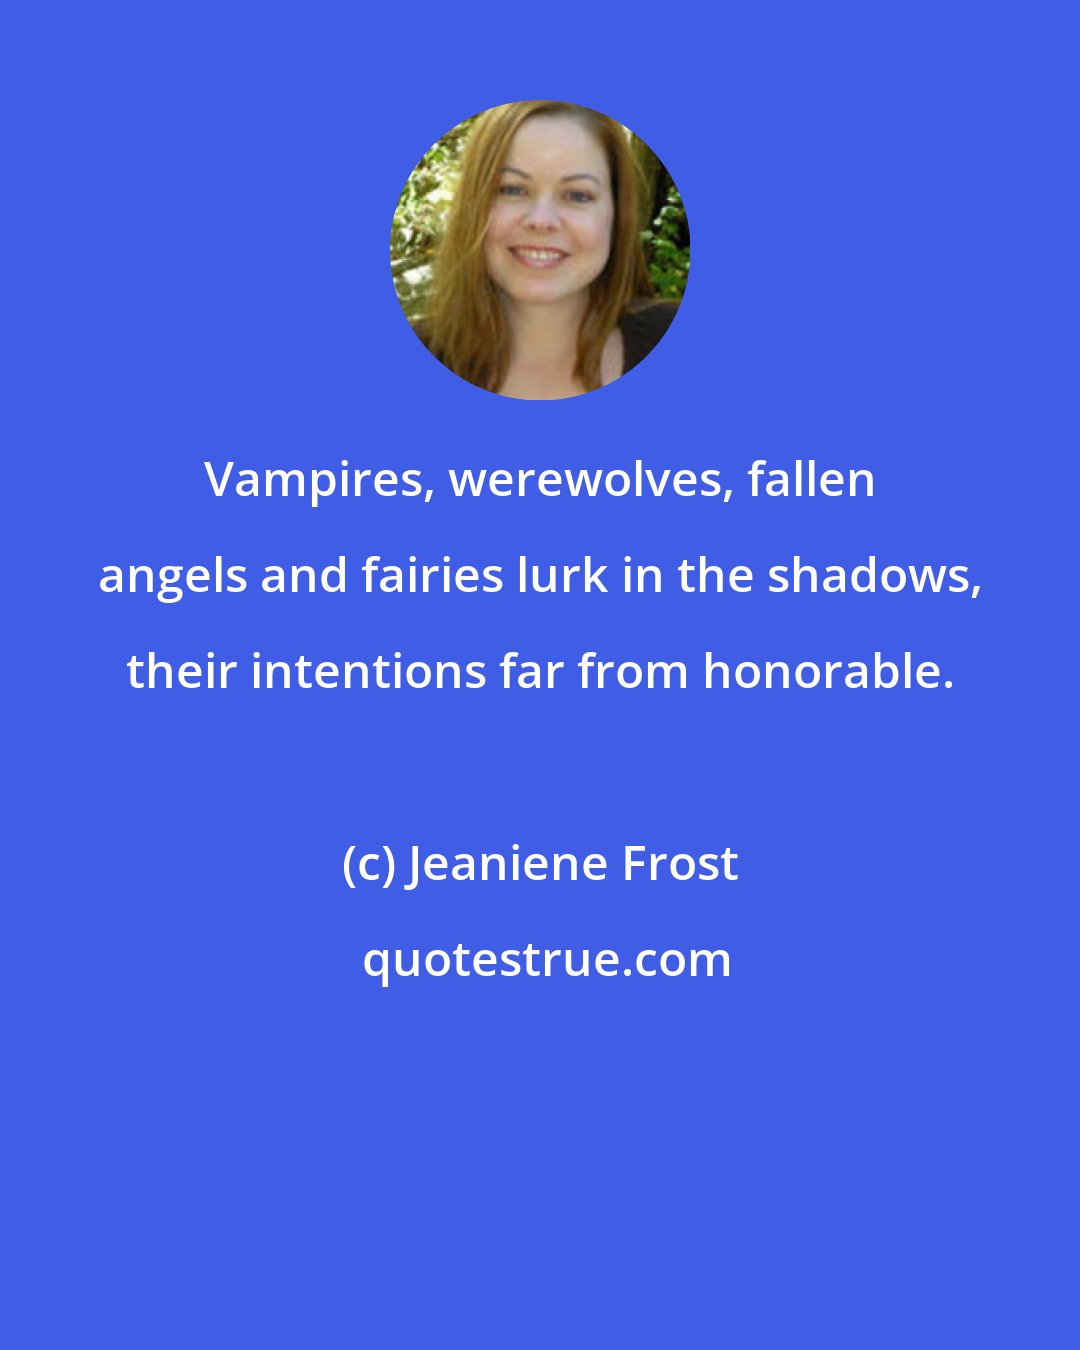 Jeaniene Frost: Vampires, werewolves, fallen angels and fairies lurk in the shadows, their intentions far from honorable.